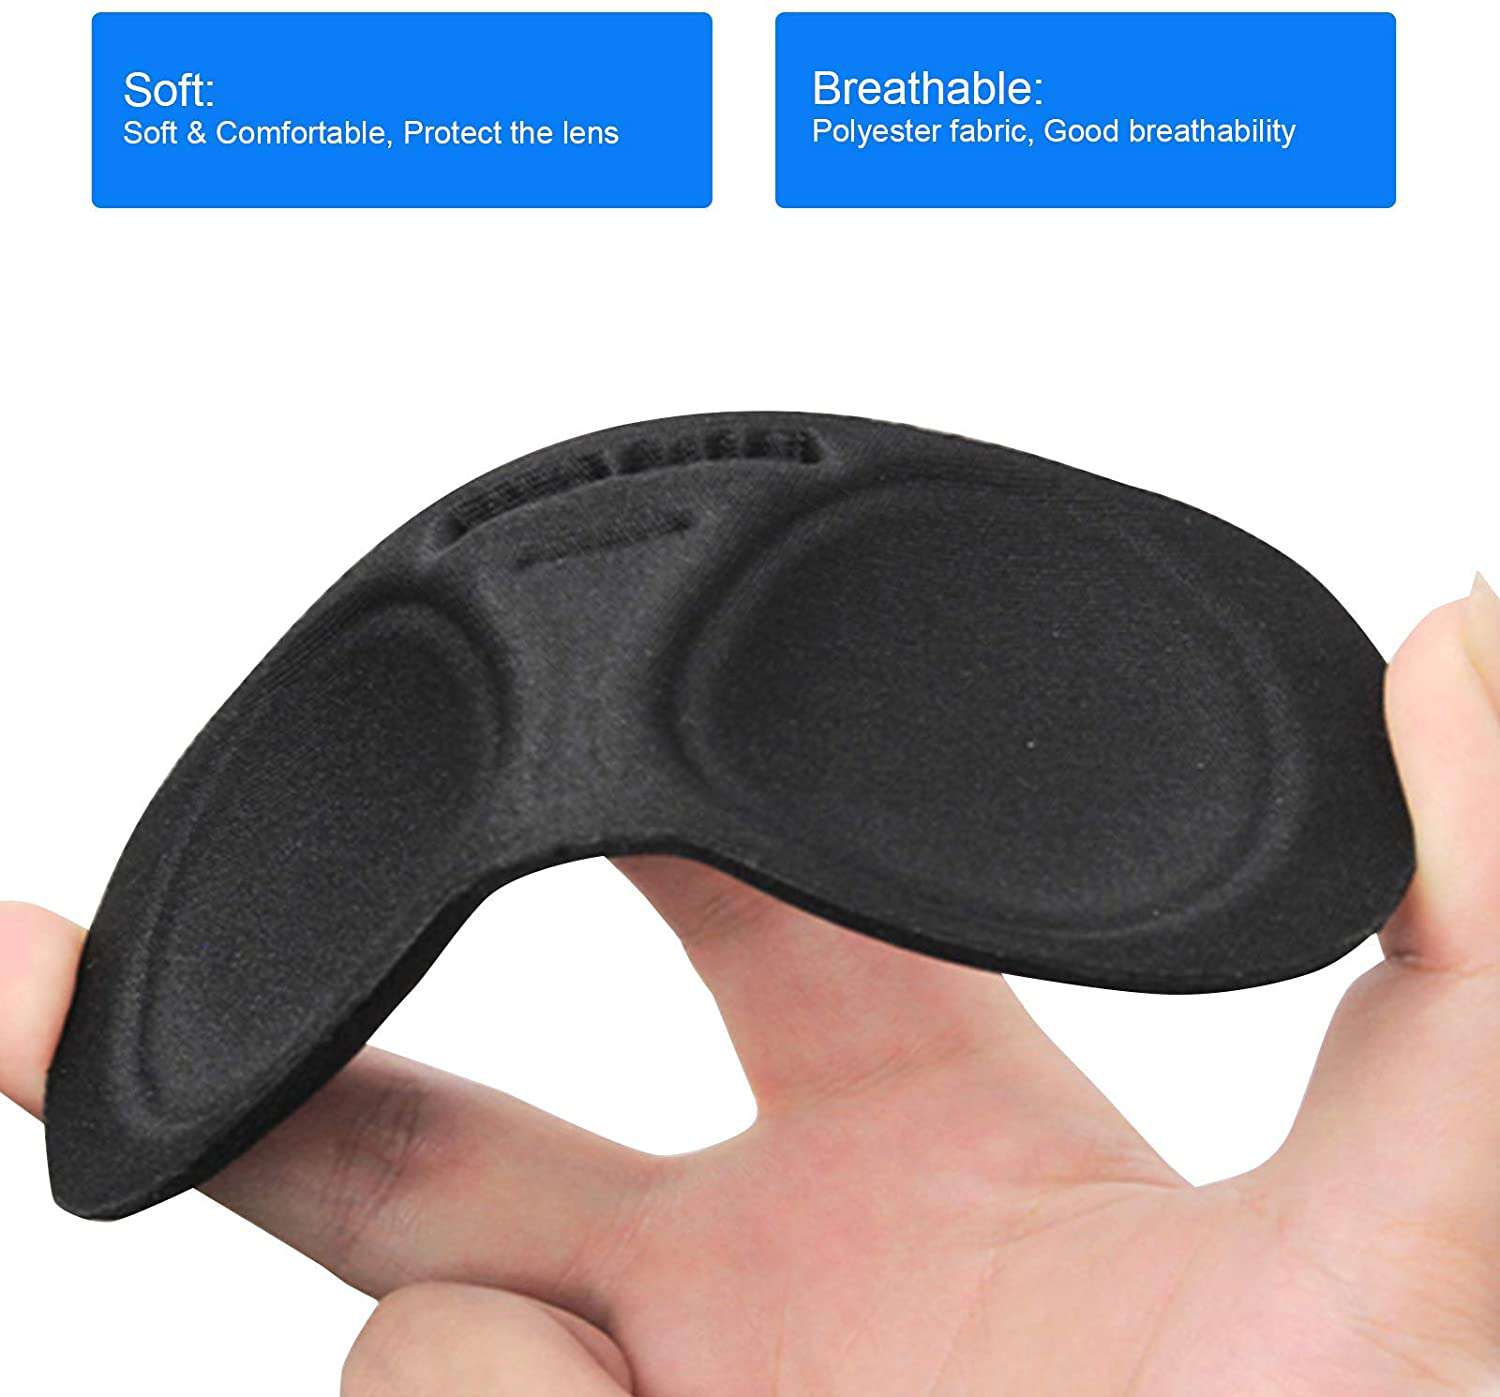 Breathable VR eye comfort foam pad for a comfortable and protective fit